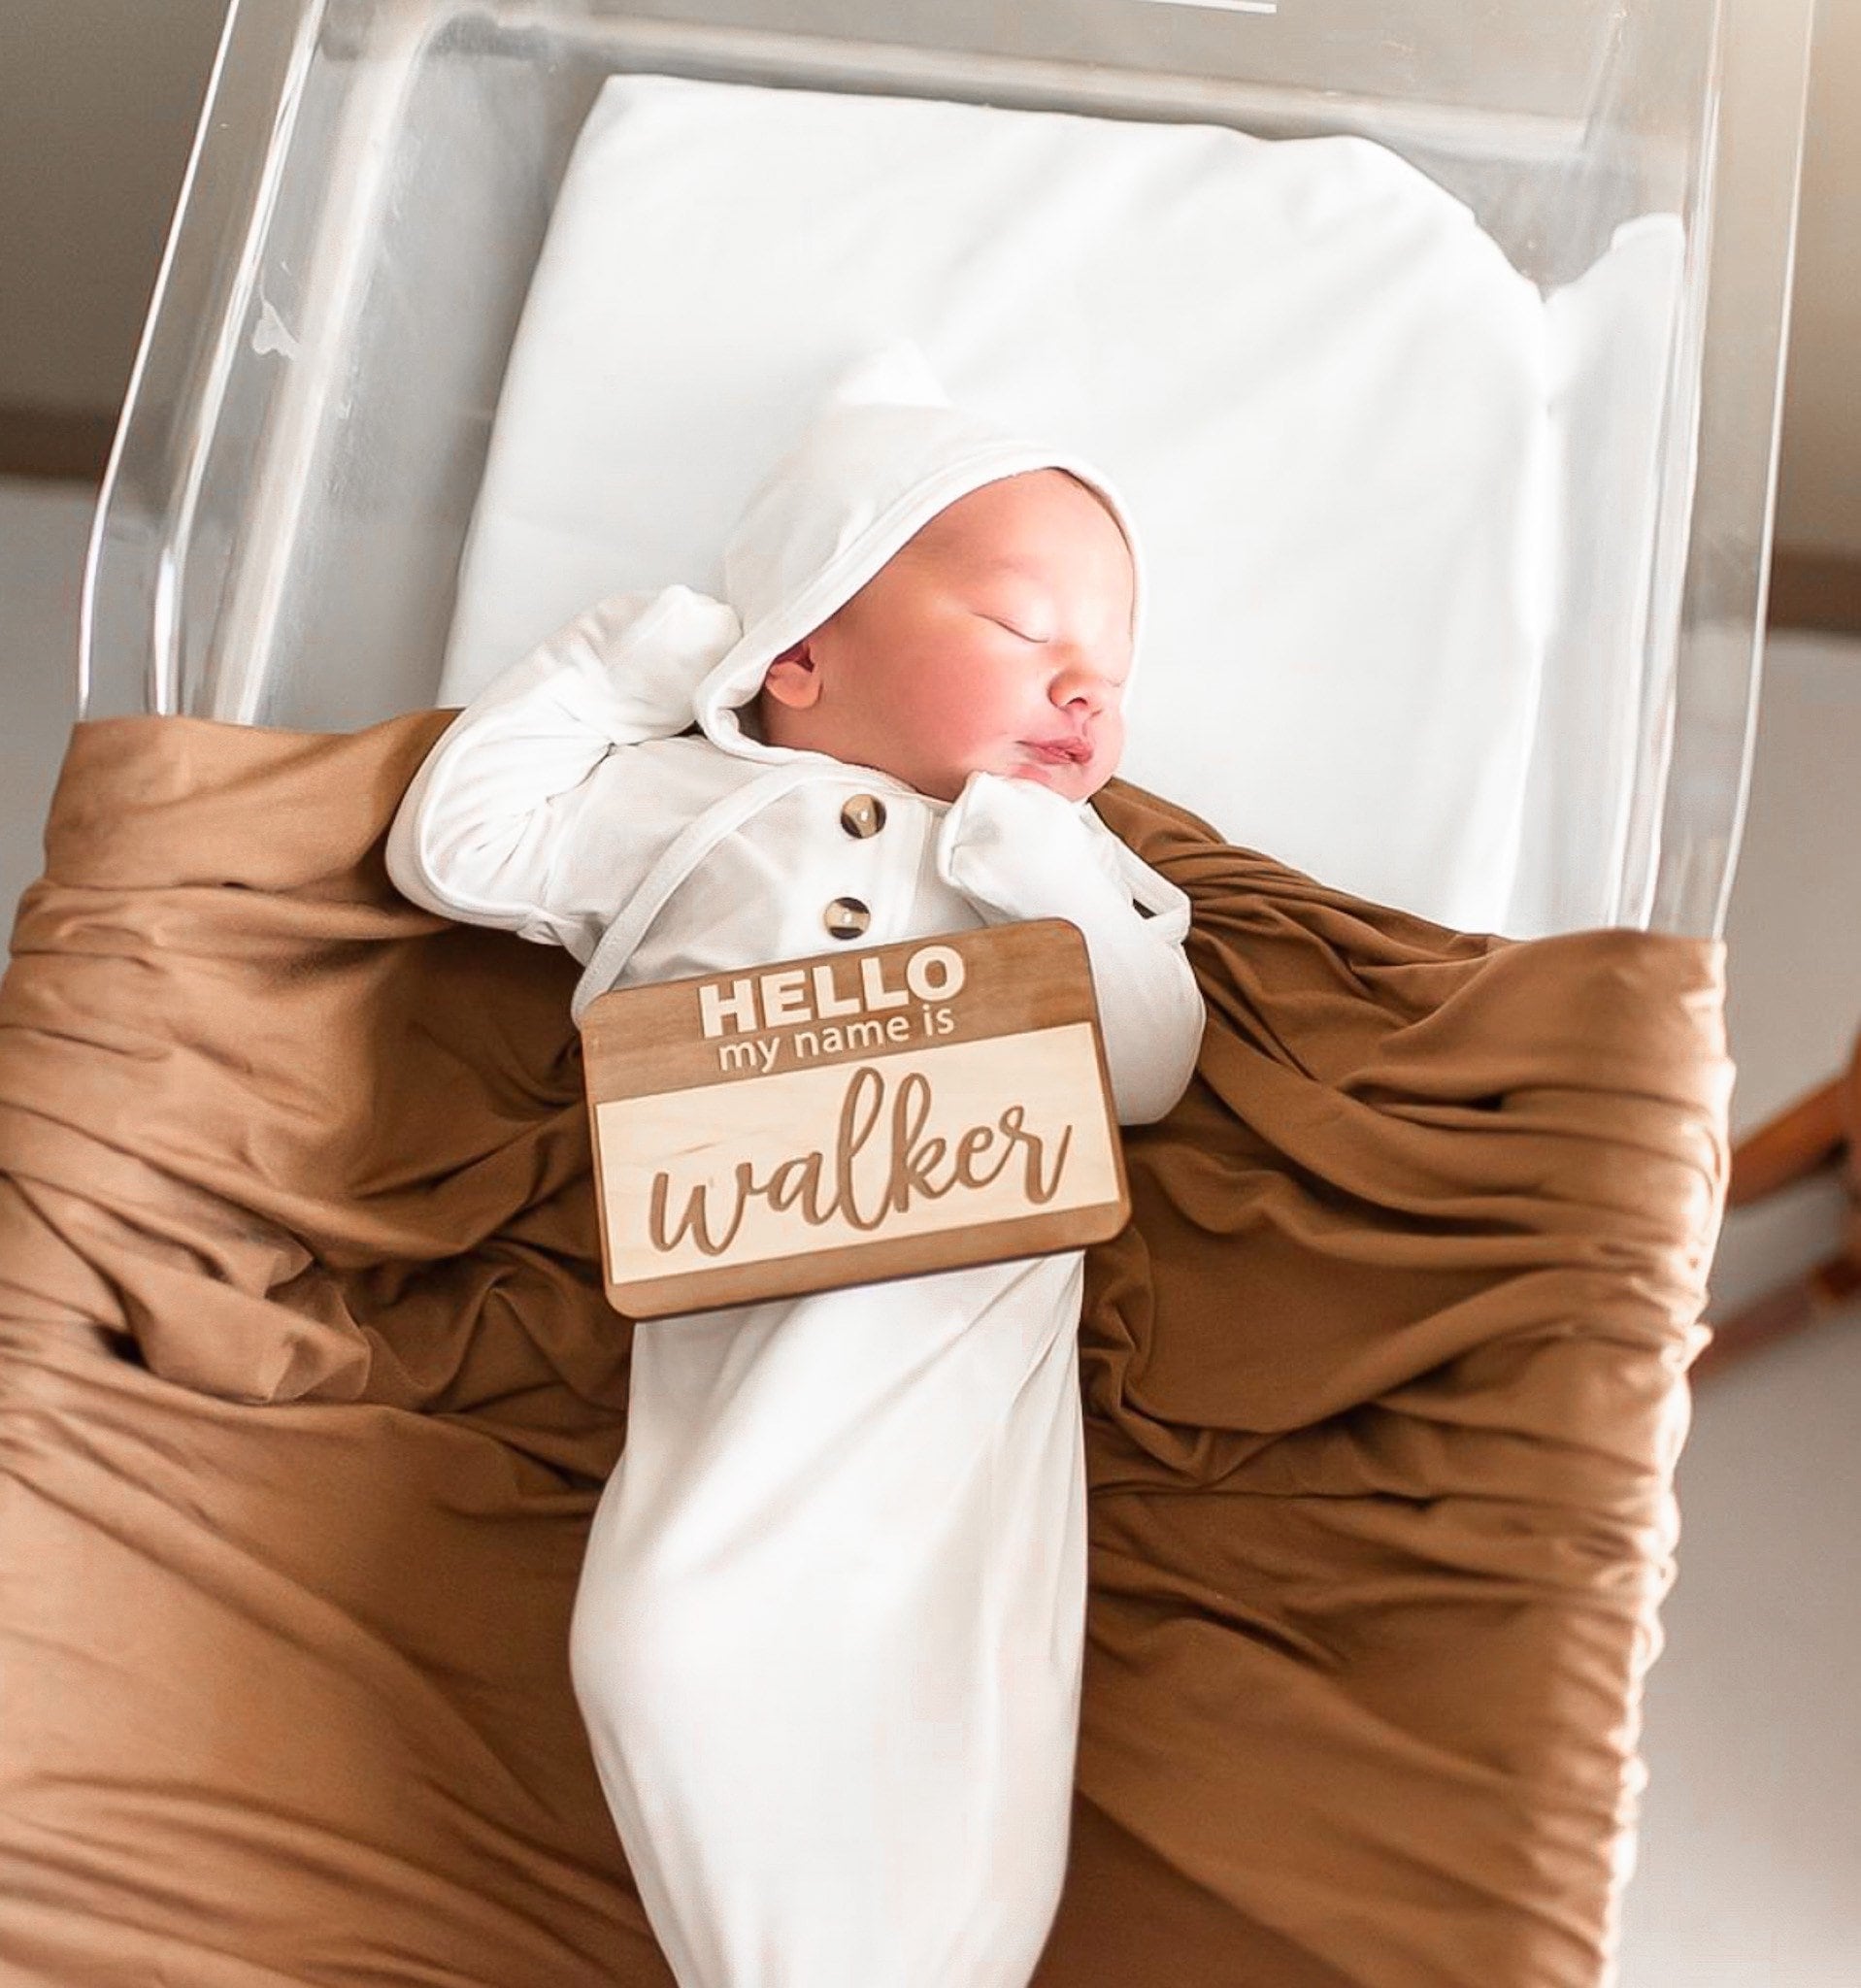 Hospital Announcement Hello My Name Is Wooden Cutout Birth Announcement Newborn Photo Prop Baby Name Announcement Baby Shower Gift